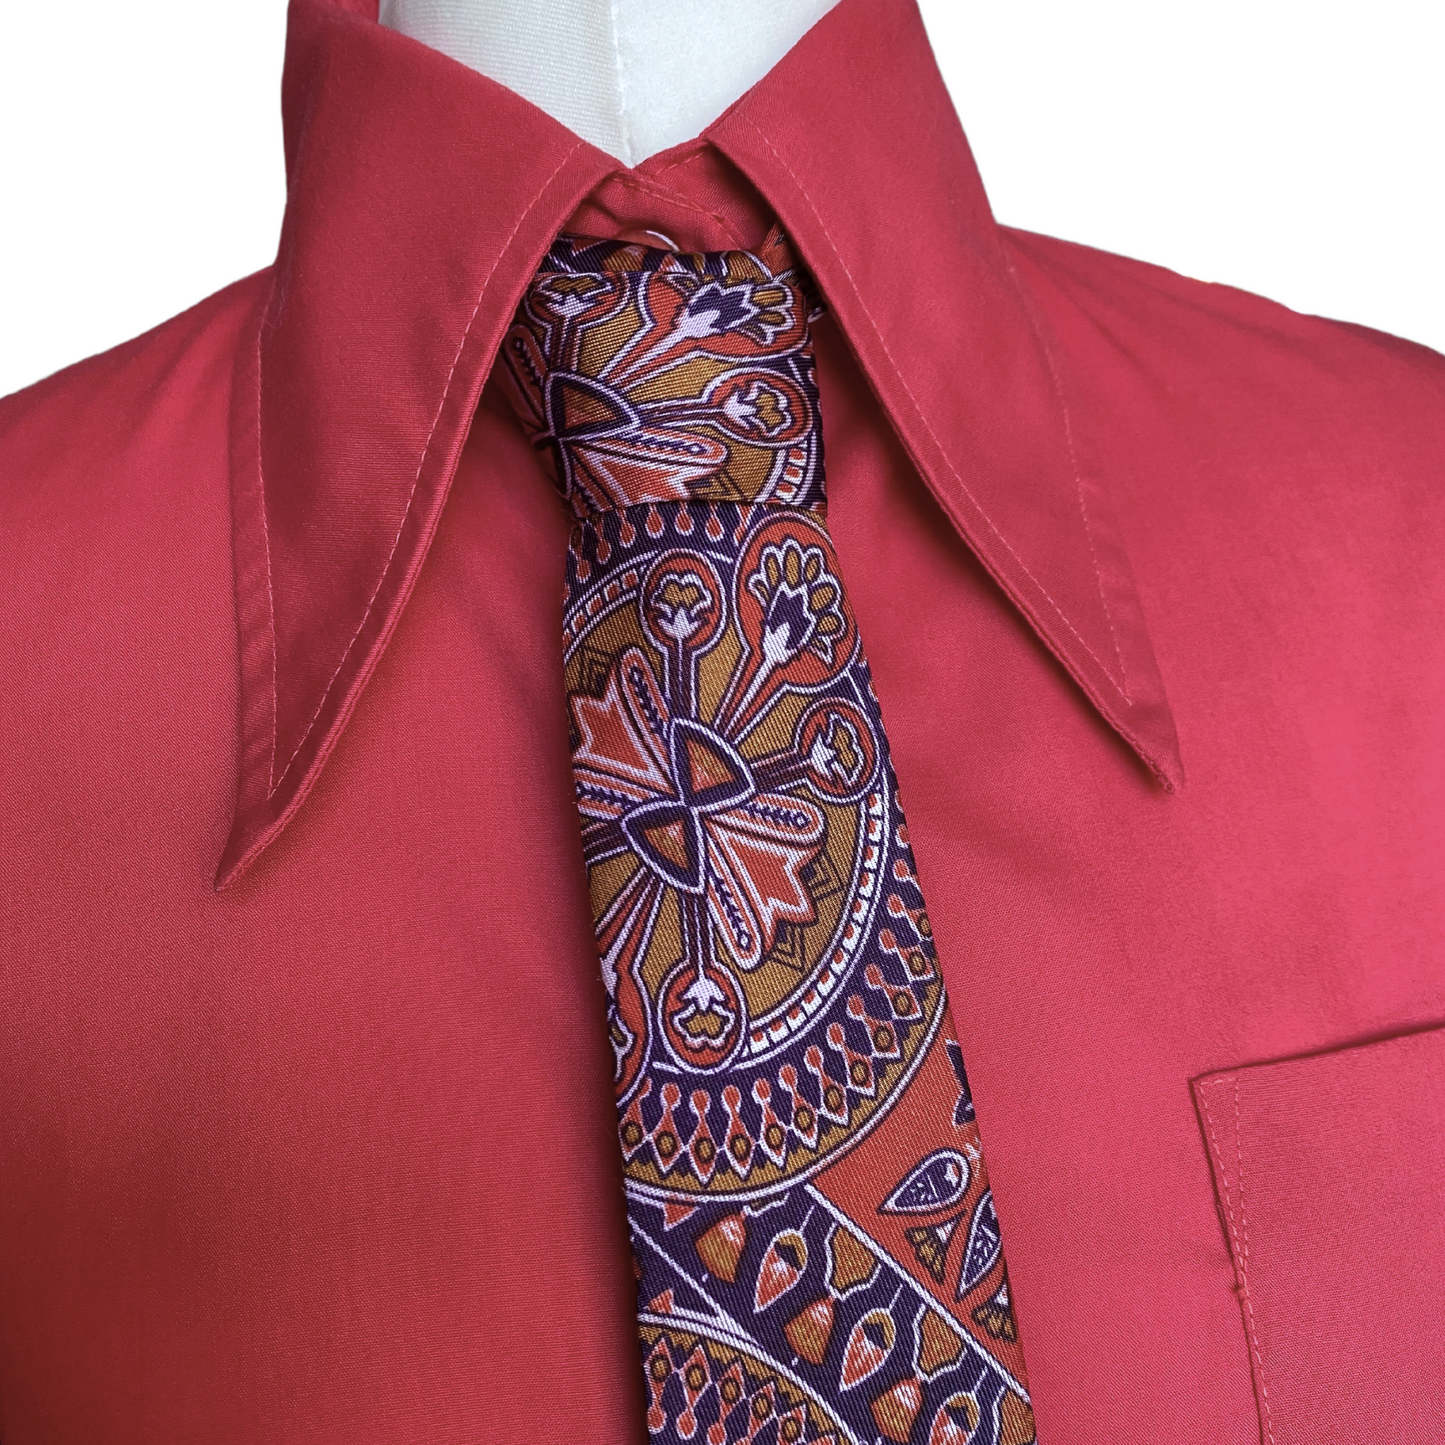 Vintage 60s Mod Style Abstract Paisley Neck Tie. Great with 60s or 70s Shirts